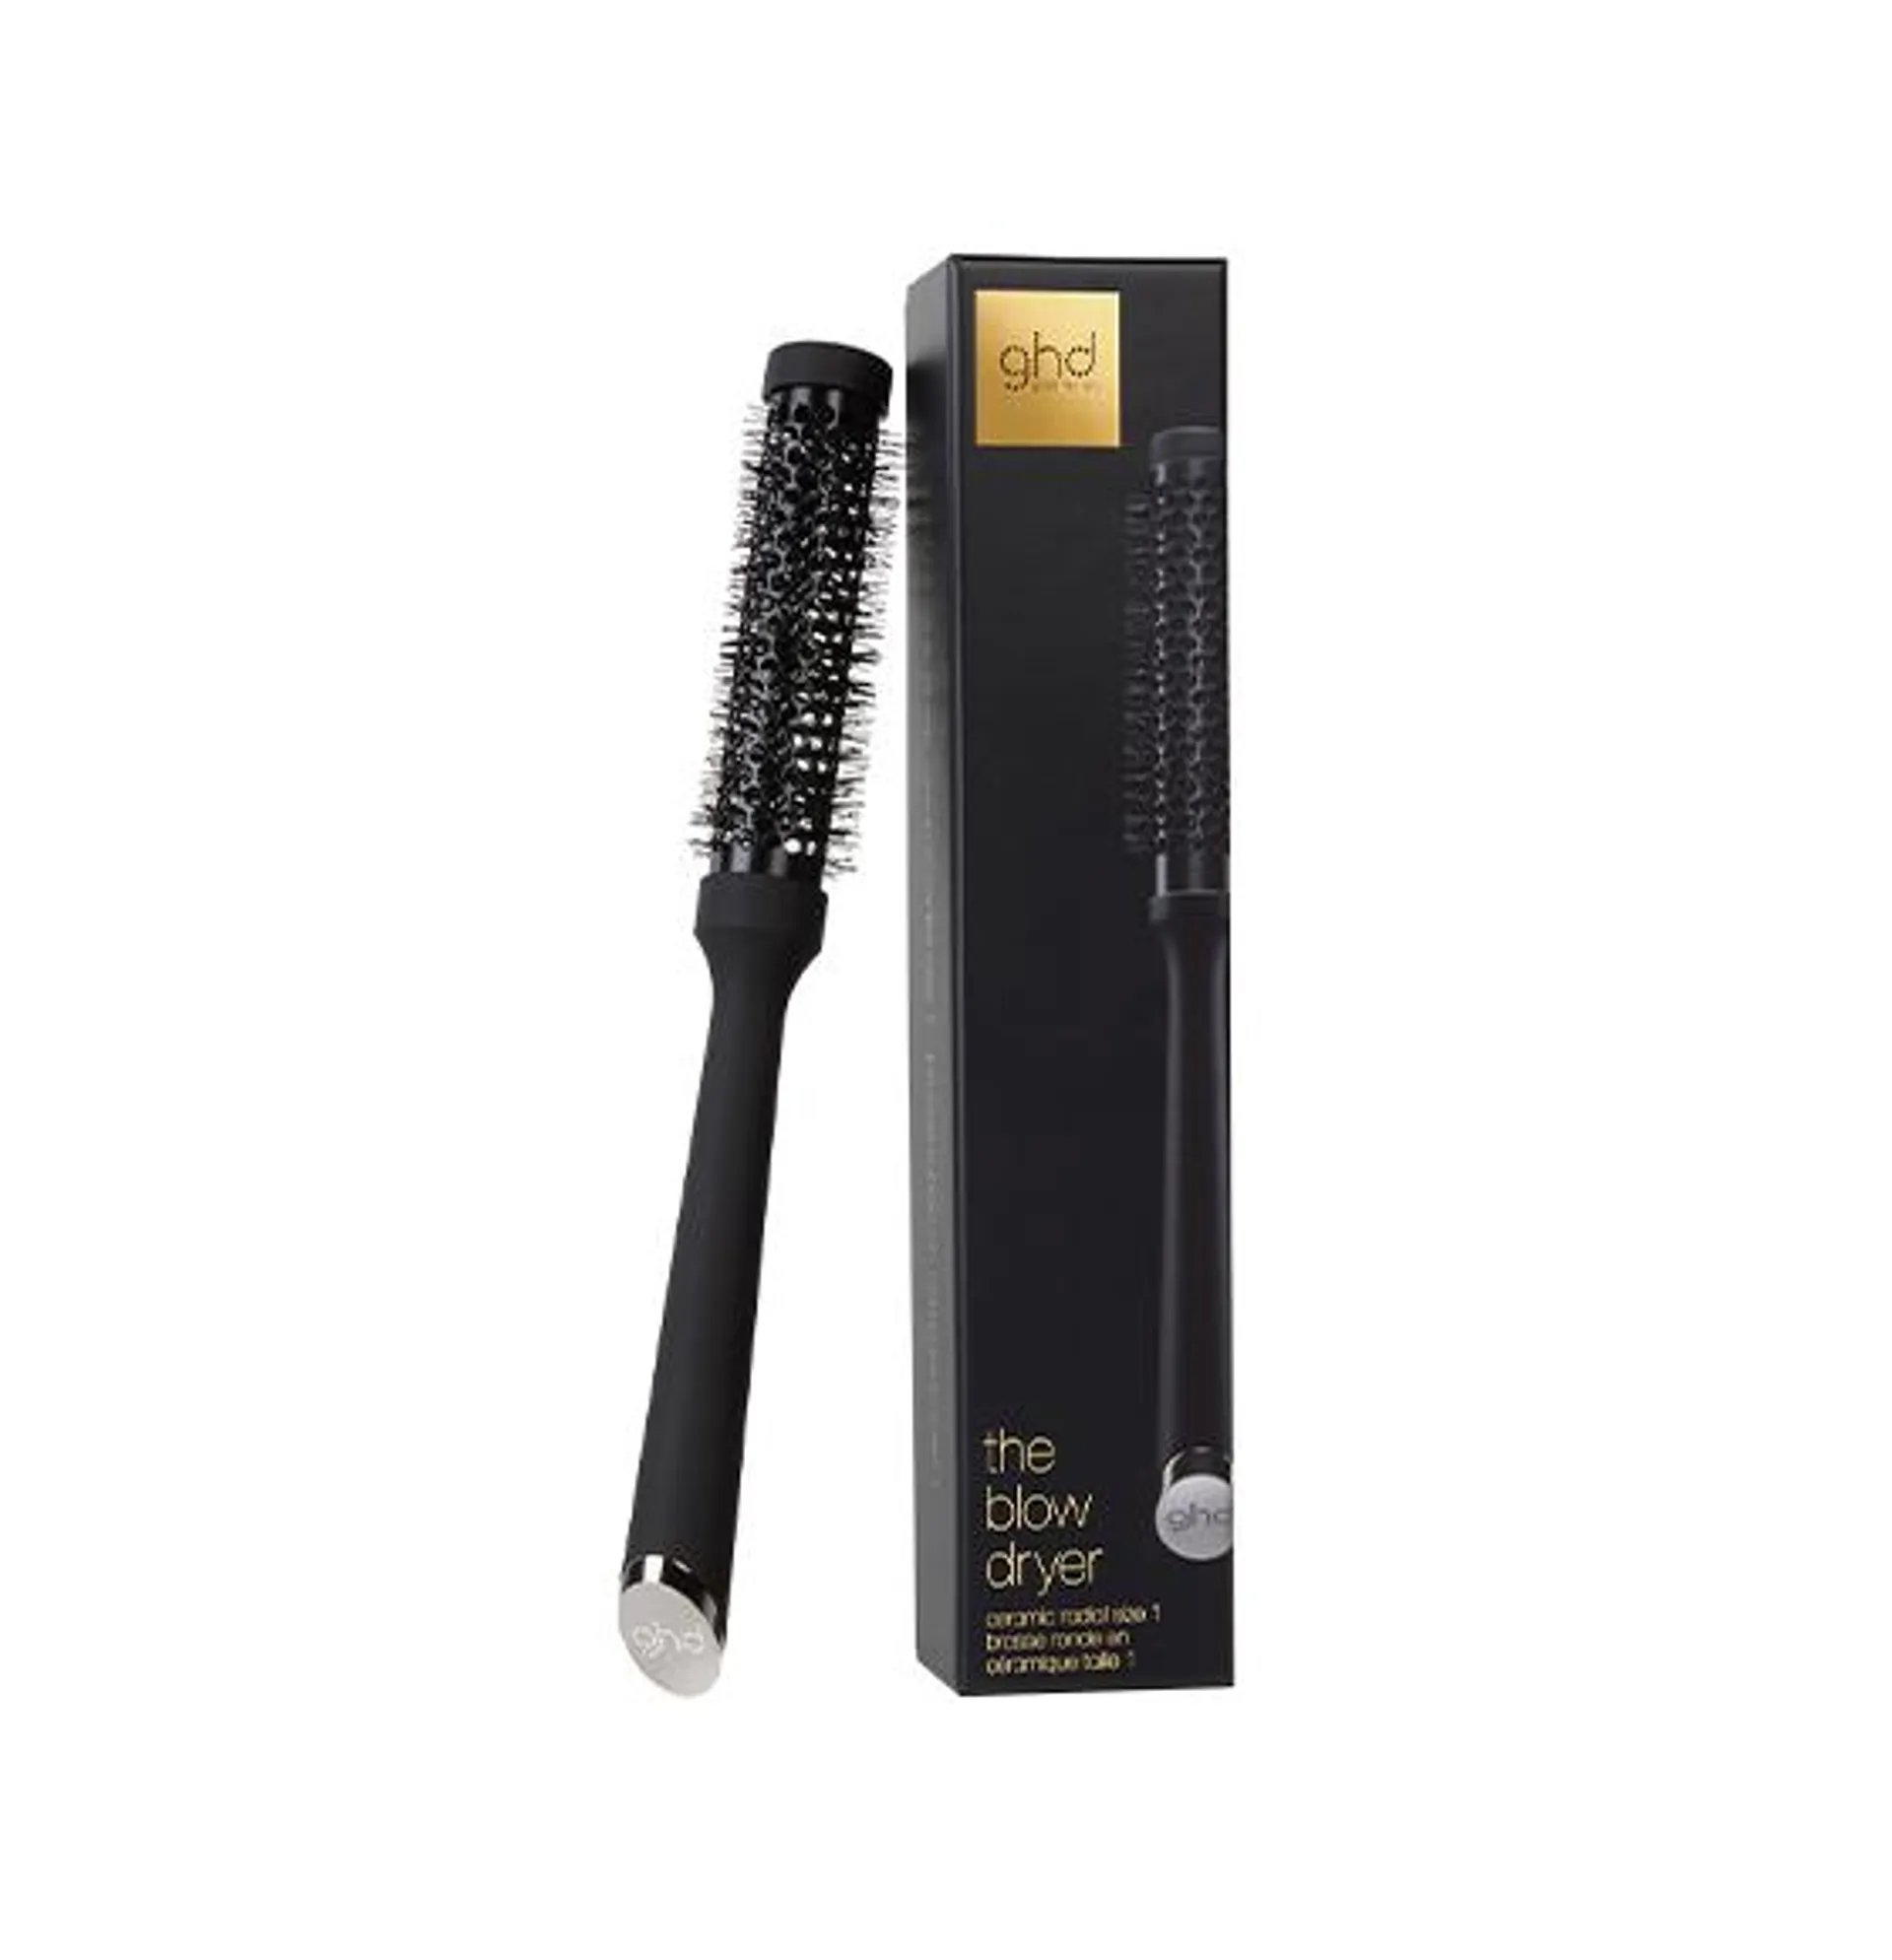 ghd The Blow Dryer Brush Size 1